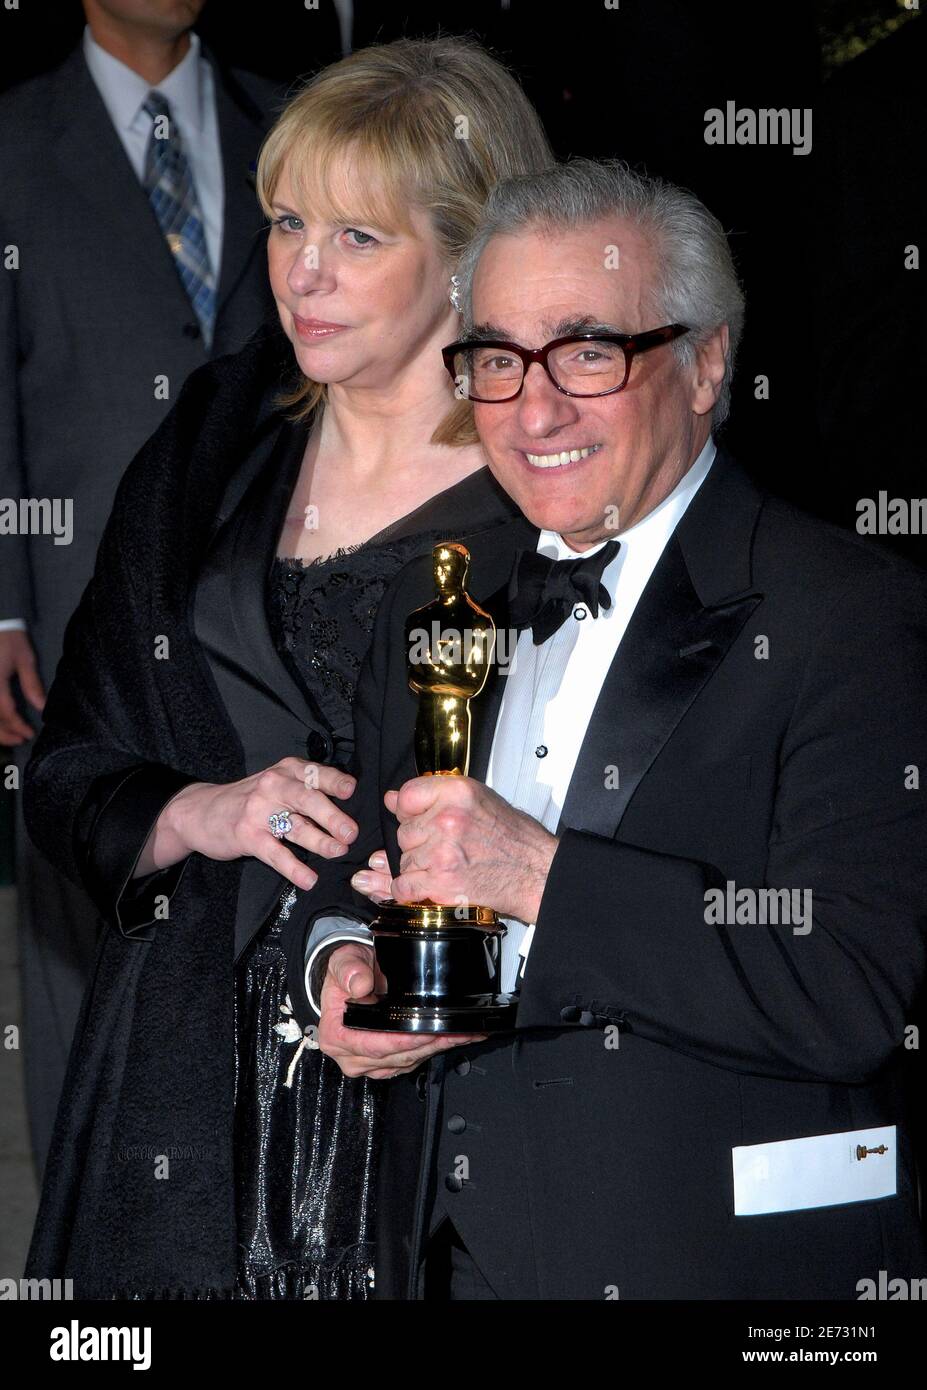 Helen Morris and husband Martin Scorsese attends the 2007 Vanity Fair Oscar Party Hosted by Graydon Carter held, at Morton's in Los Angeles, CA, USA on February 25, 2007. Photo by Hahn-Khayat-Douliery/ABACAPRESS.COM Stock Photo